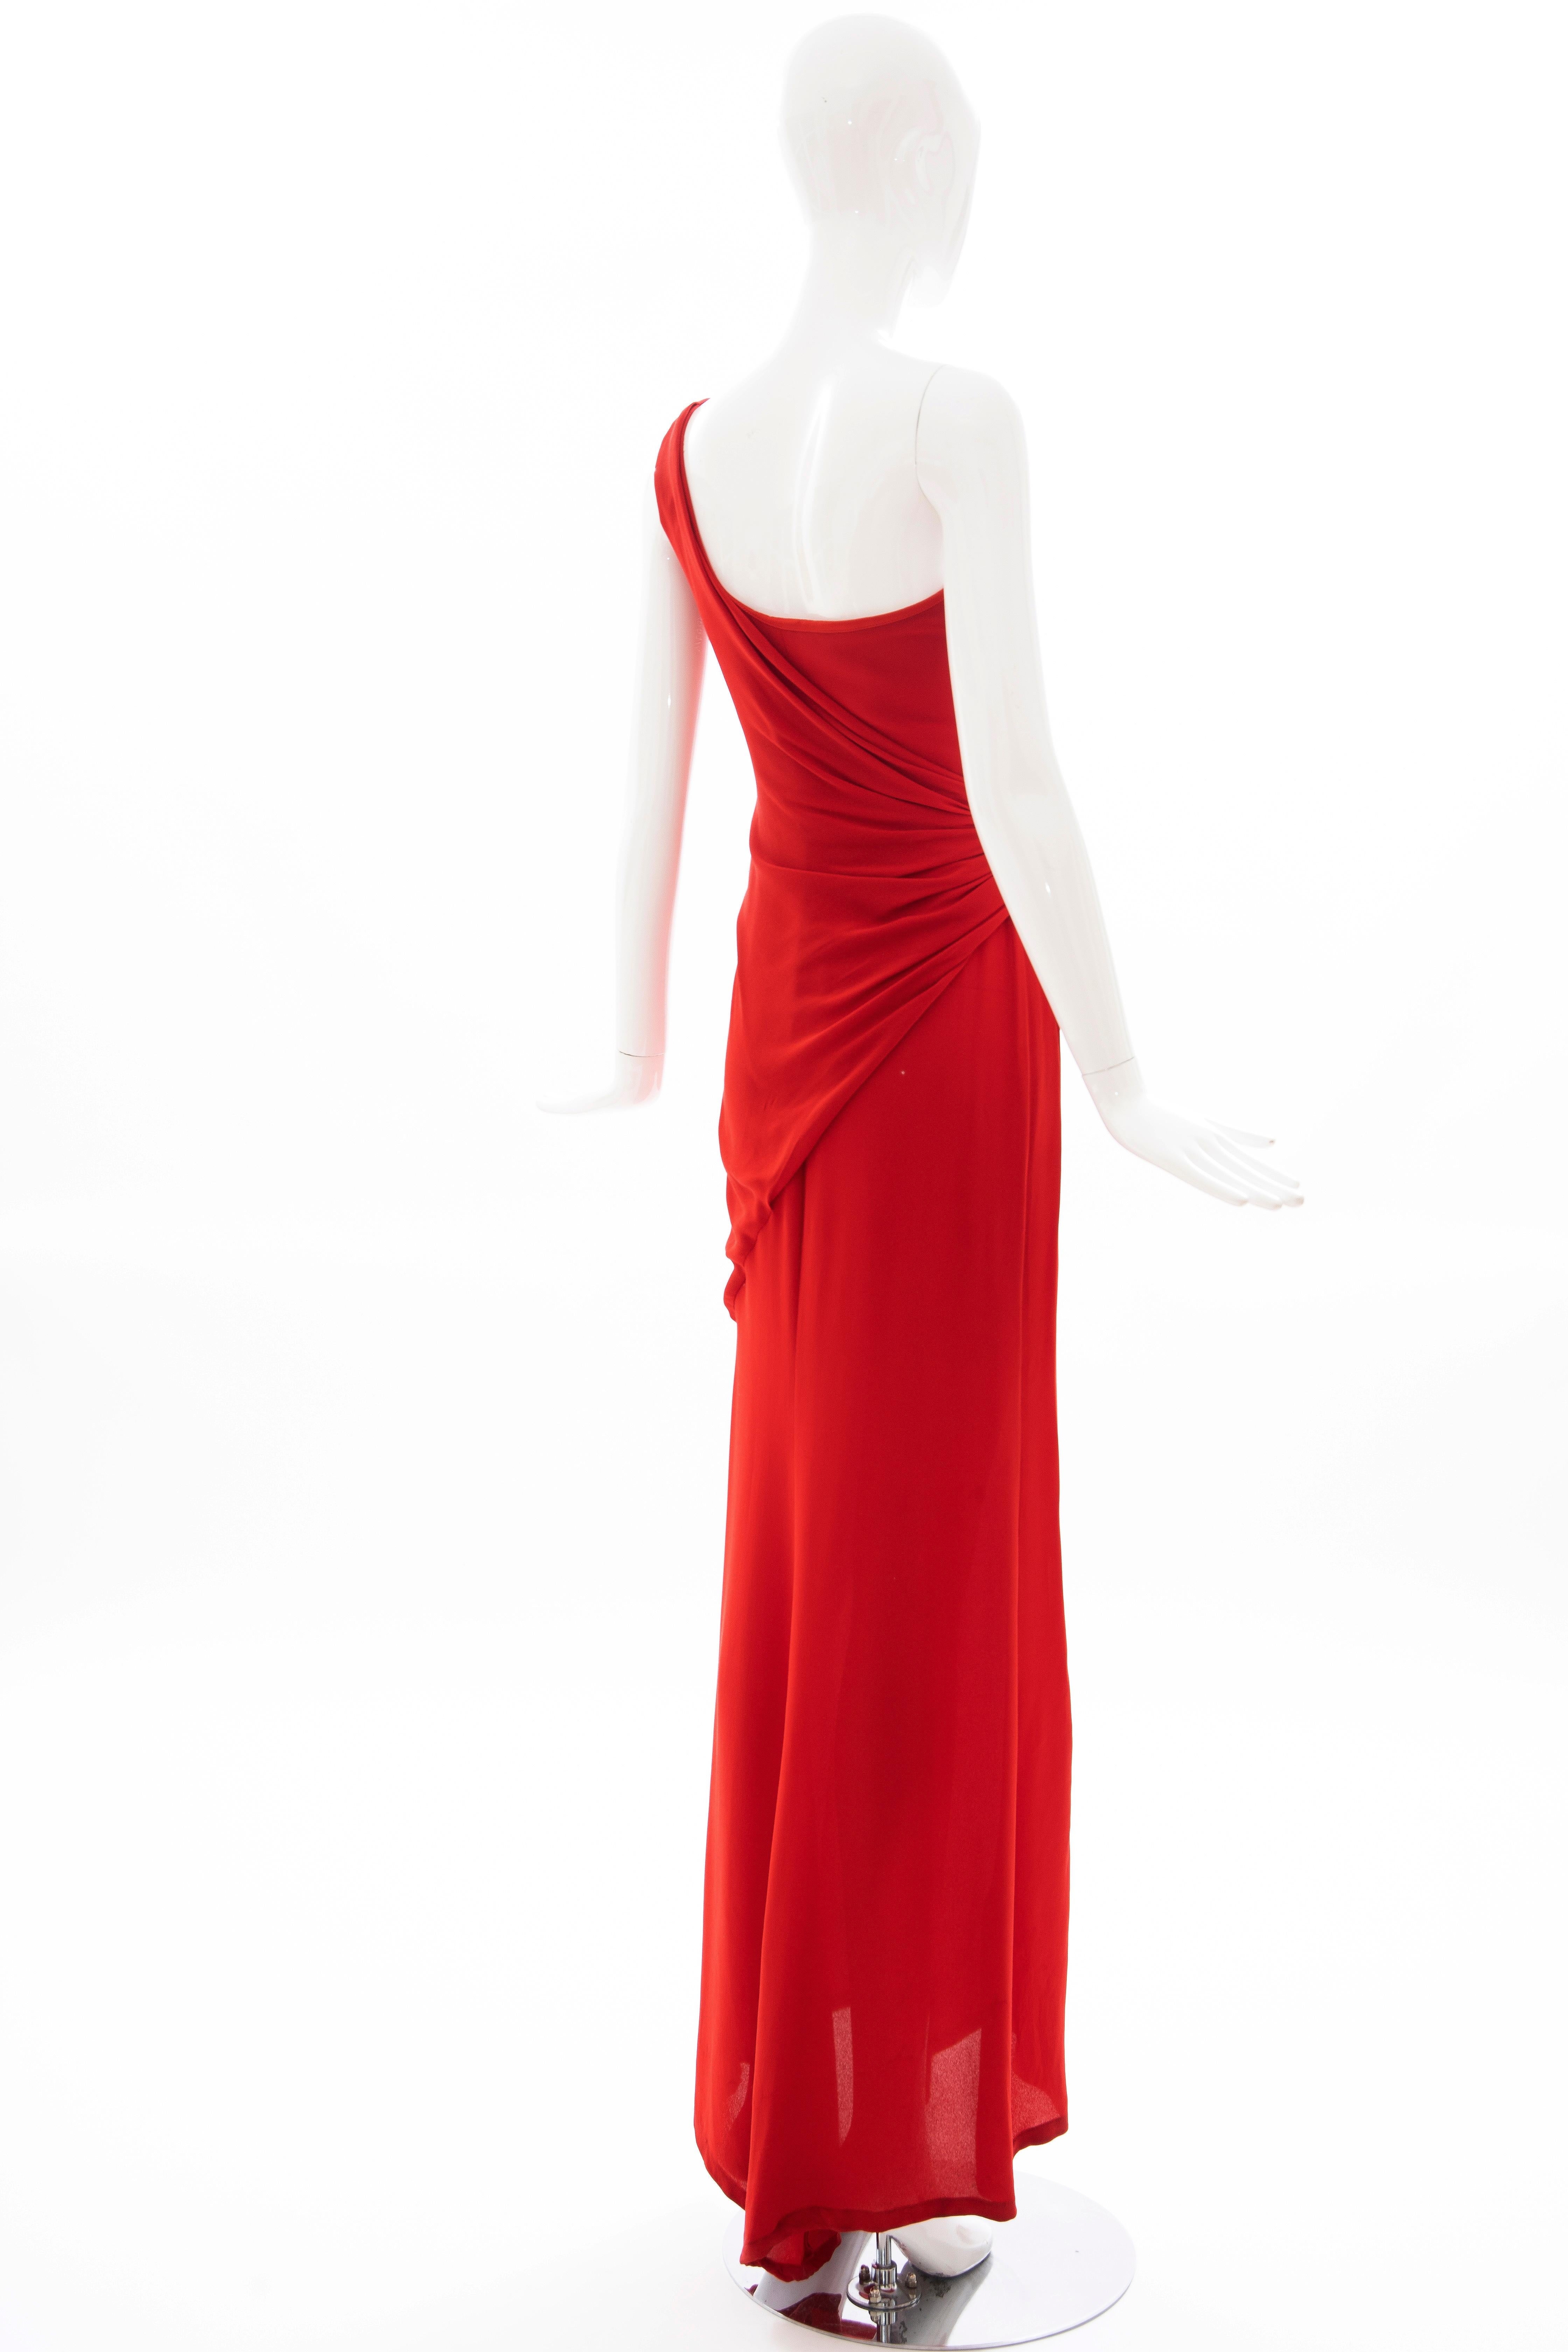 Valentino Runway Red Silk Crepe Evening Dress (Final Collection), Spring 2008 For Sale 2